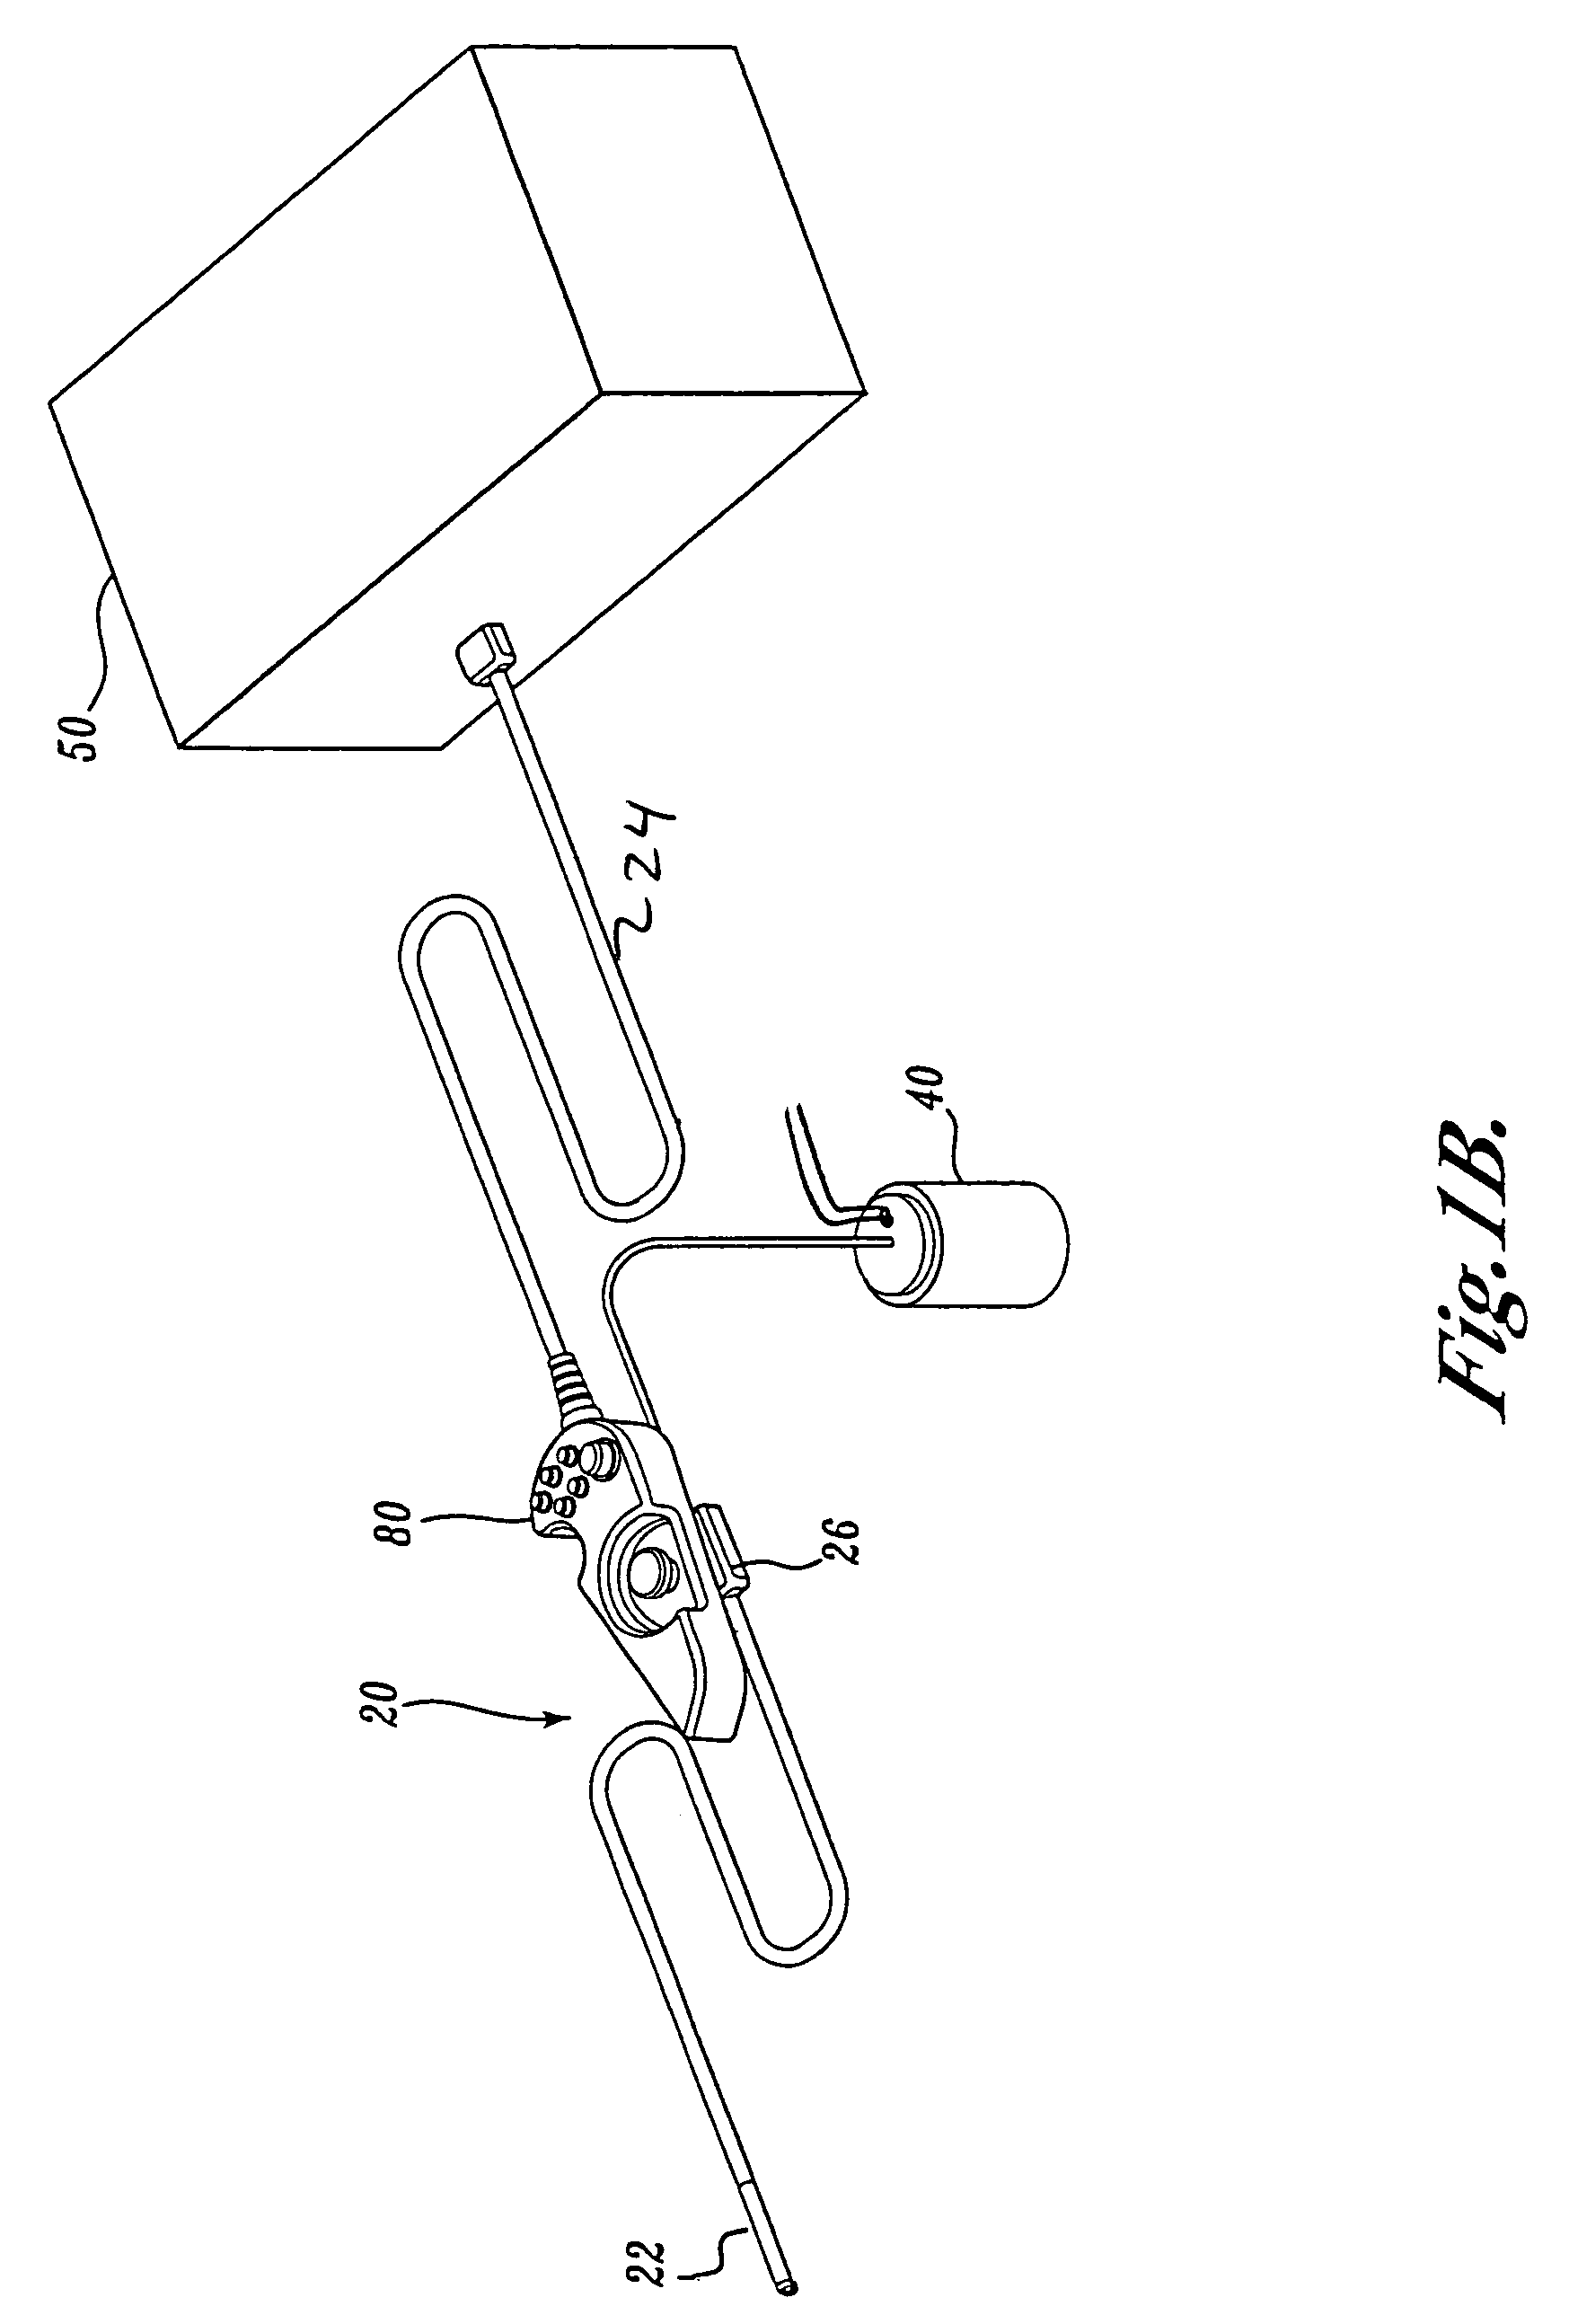 Articulation joint for video endoscope